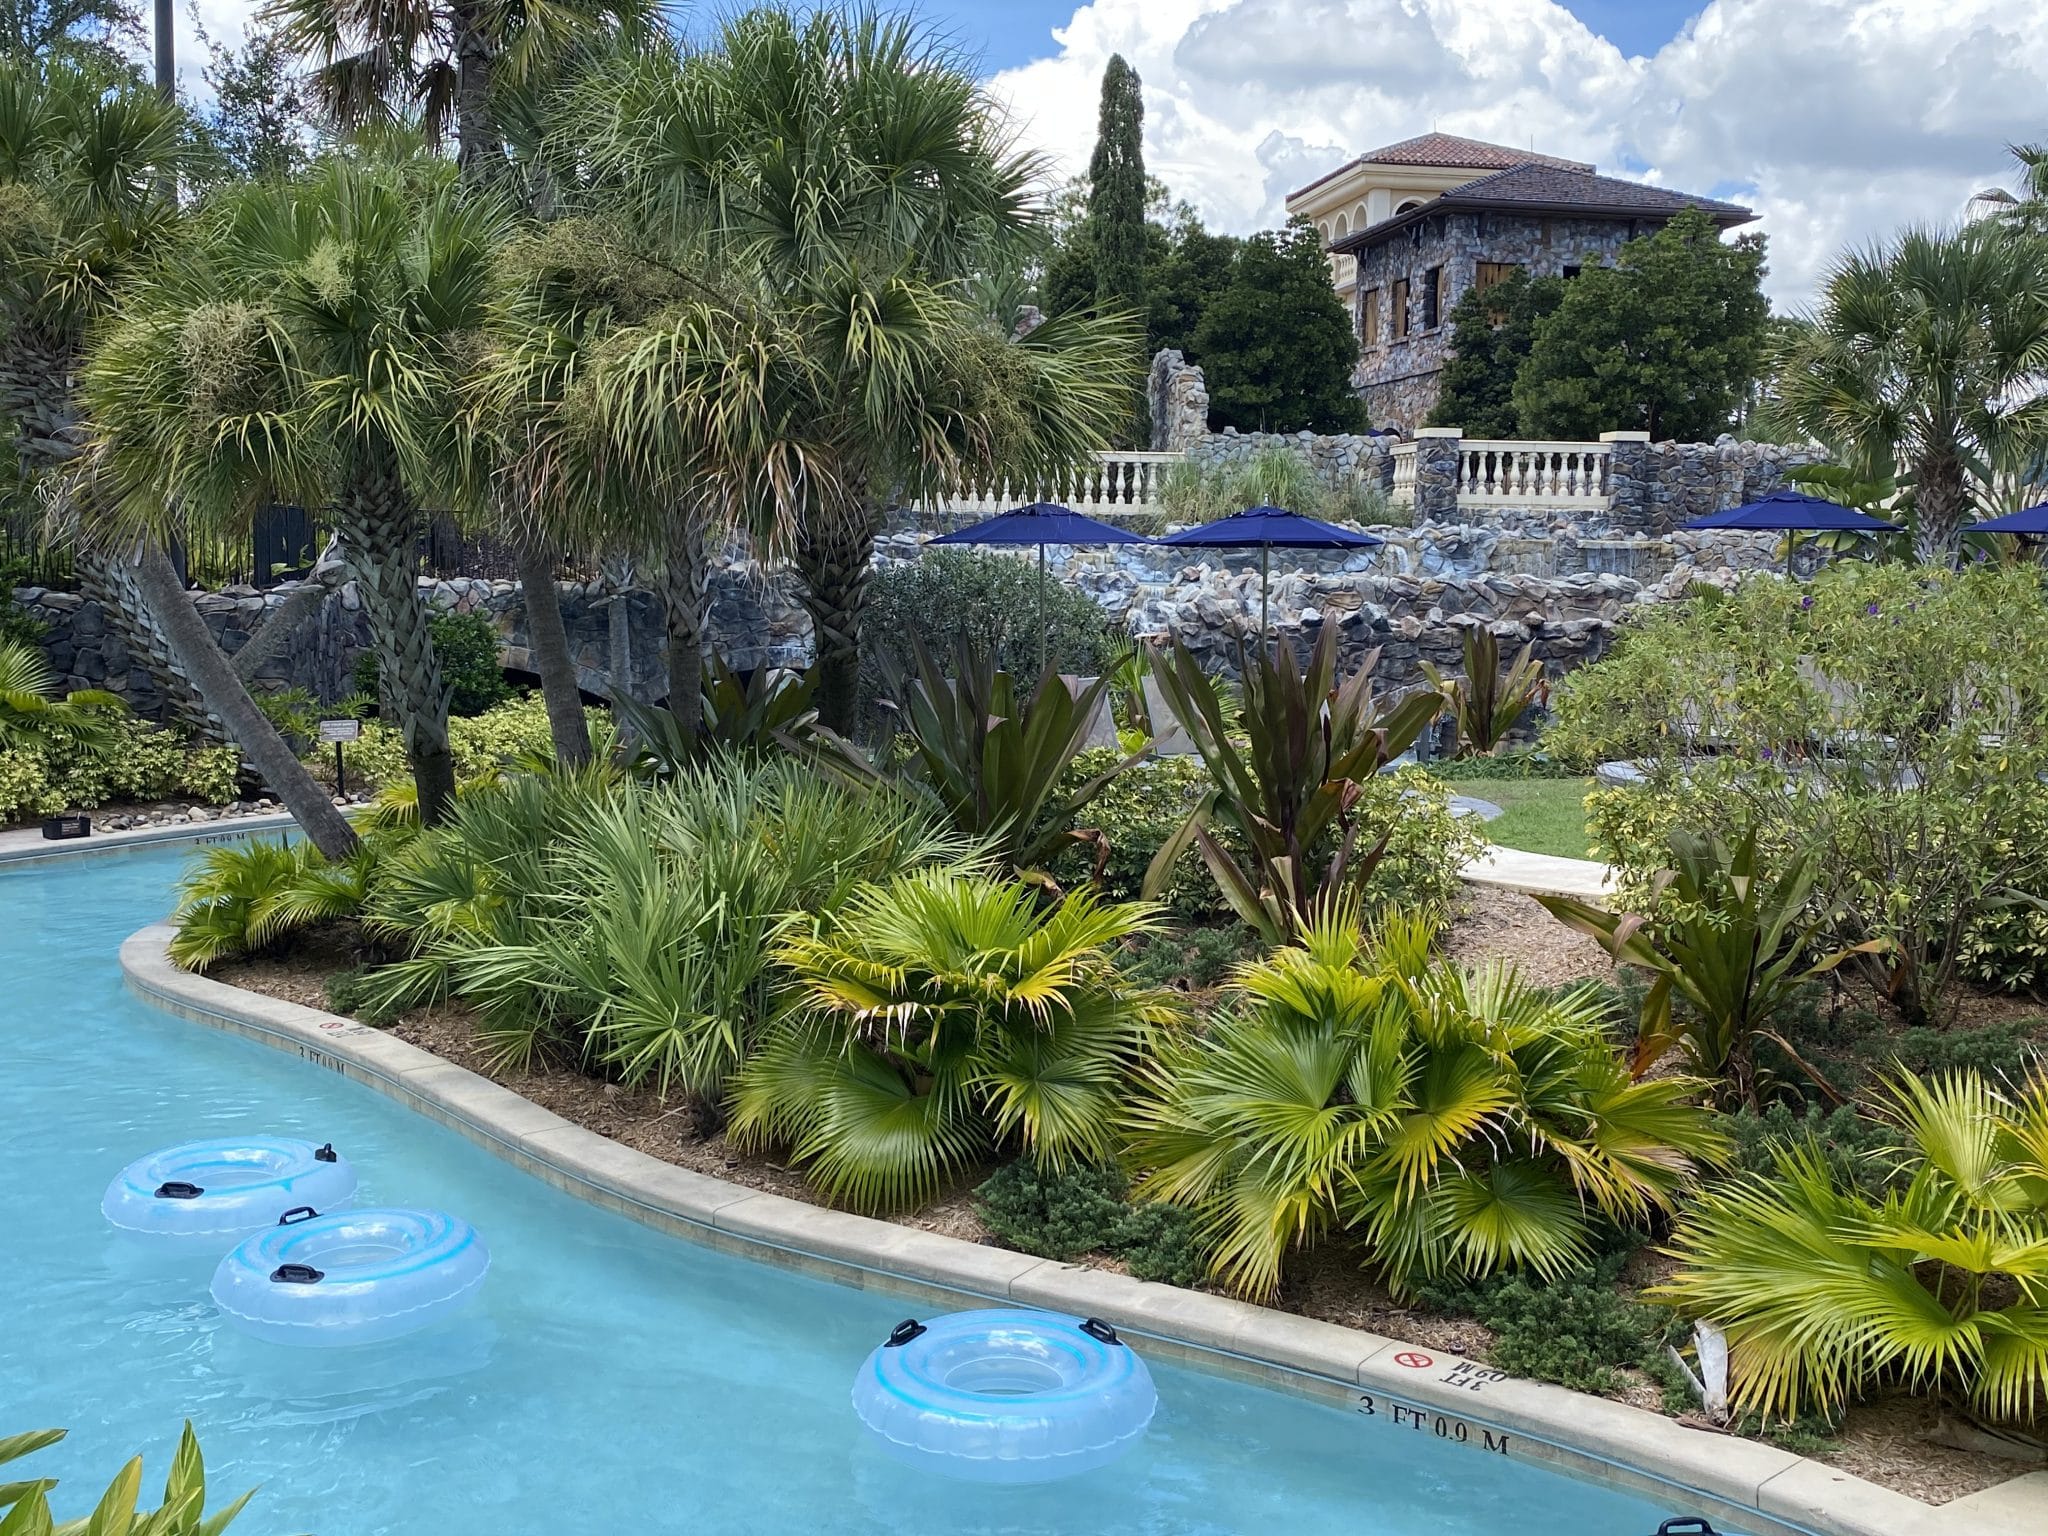 The Best Things to Do in Orlando for Adults - Amber Likes